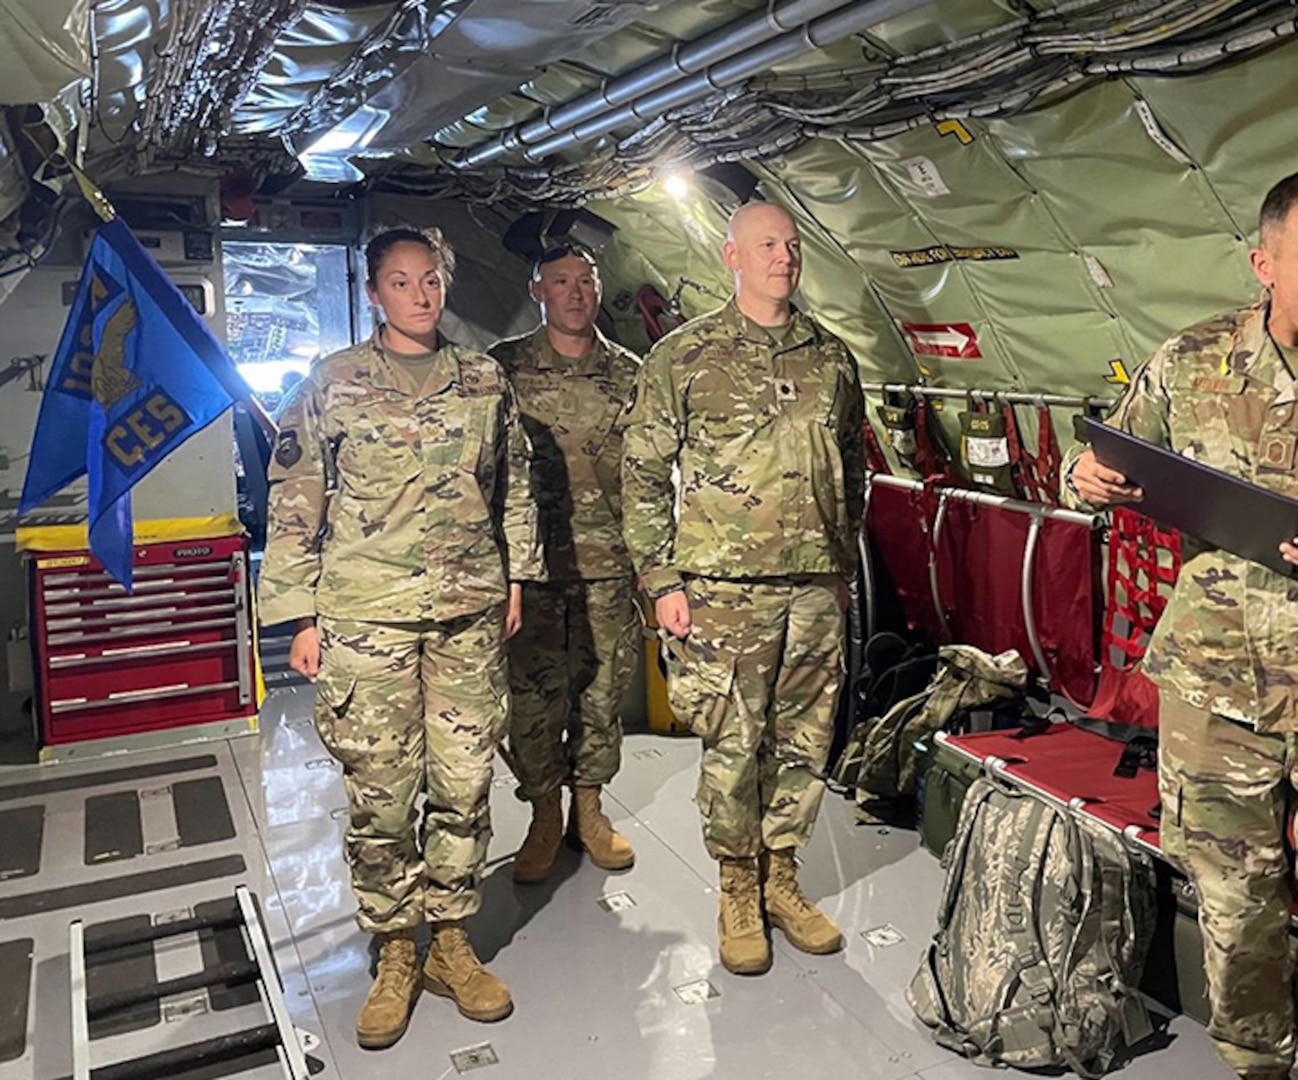 102nd Civil Engineer Squadron commander, Lt. Col. Christian Leighton, promotes Tech. Sgt. Morgan Marconi to the rank of Master Sgt. while in flight on the way to Montana to participate in this year’s Air National Guard Civil Engineer Innovative Readiness Training.